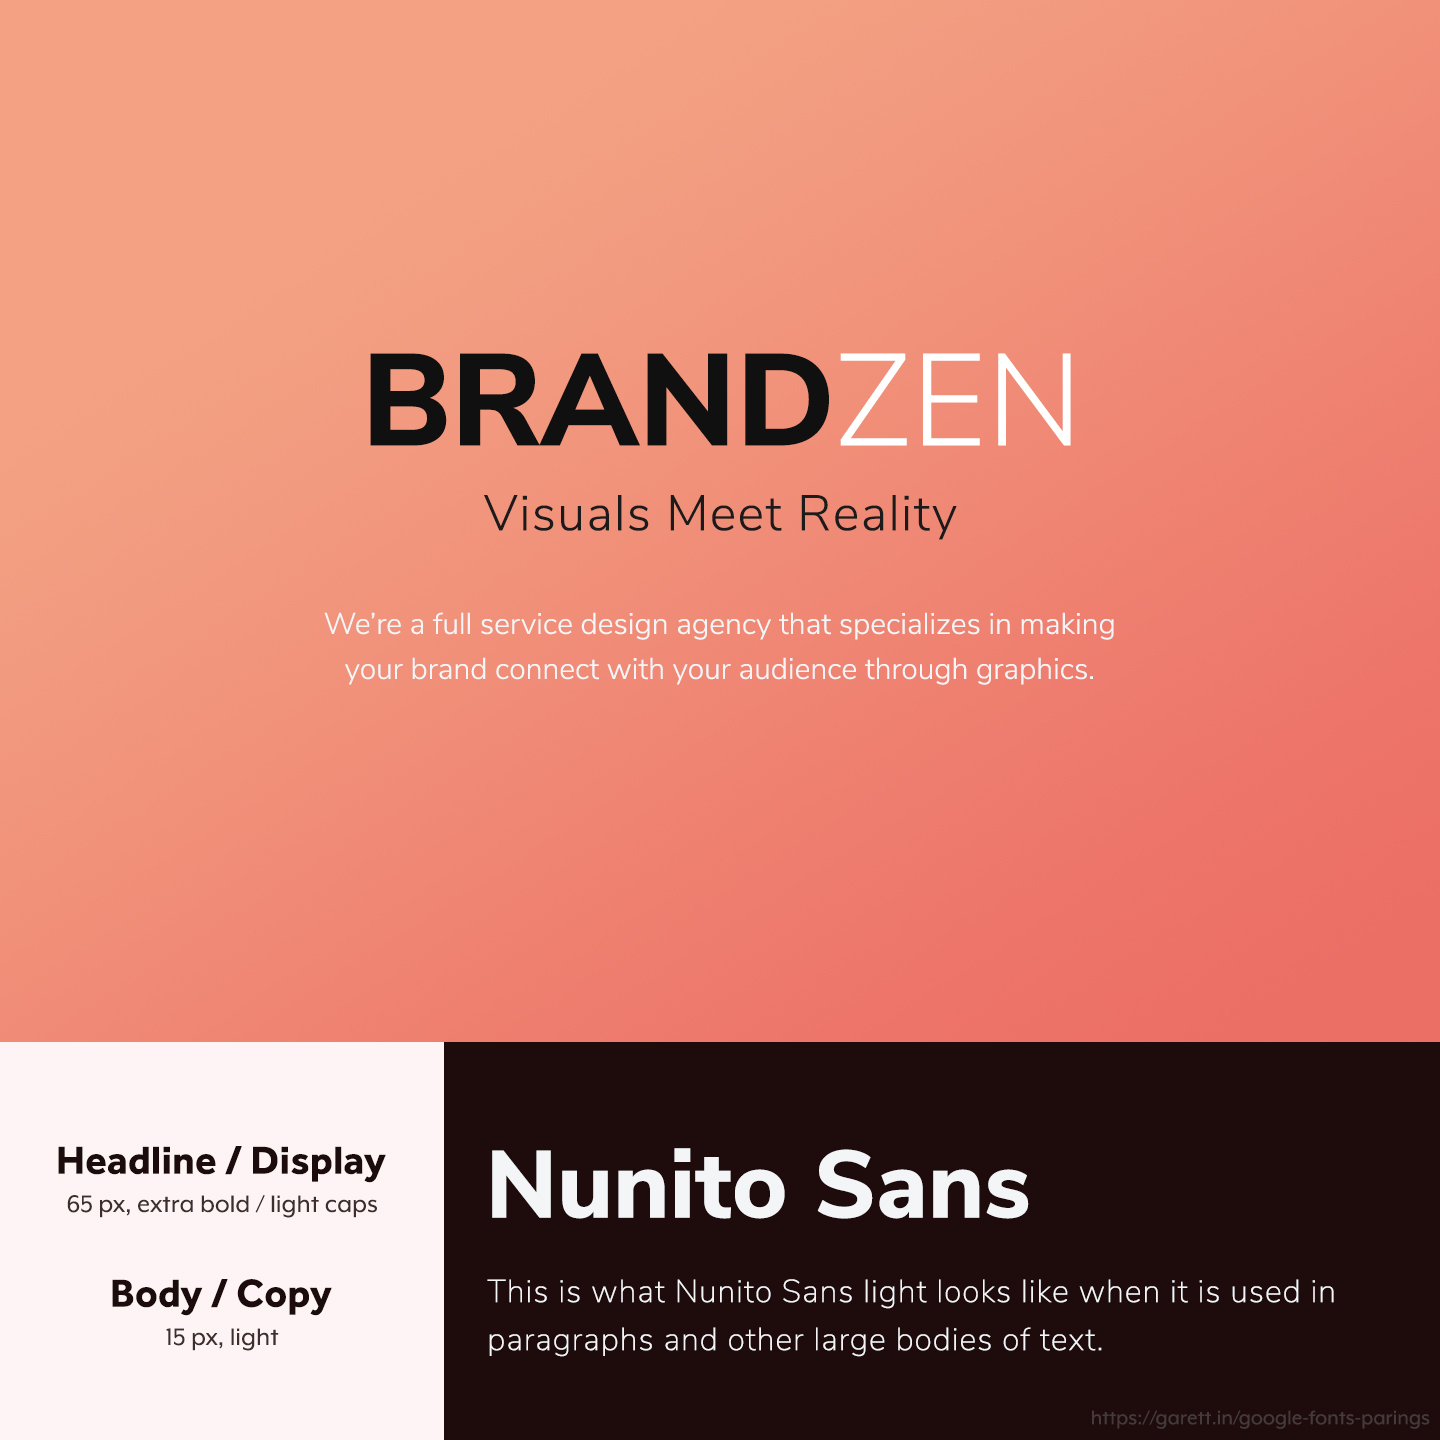 Nunito Sans family font pairing - 30 Google Font Pairings for Your Brand and Website